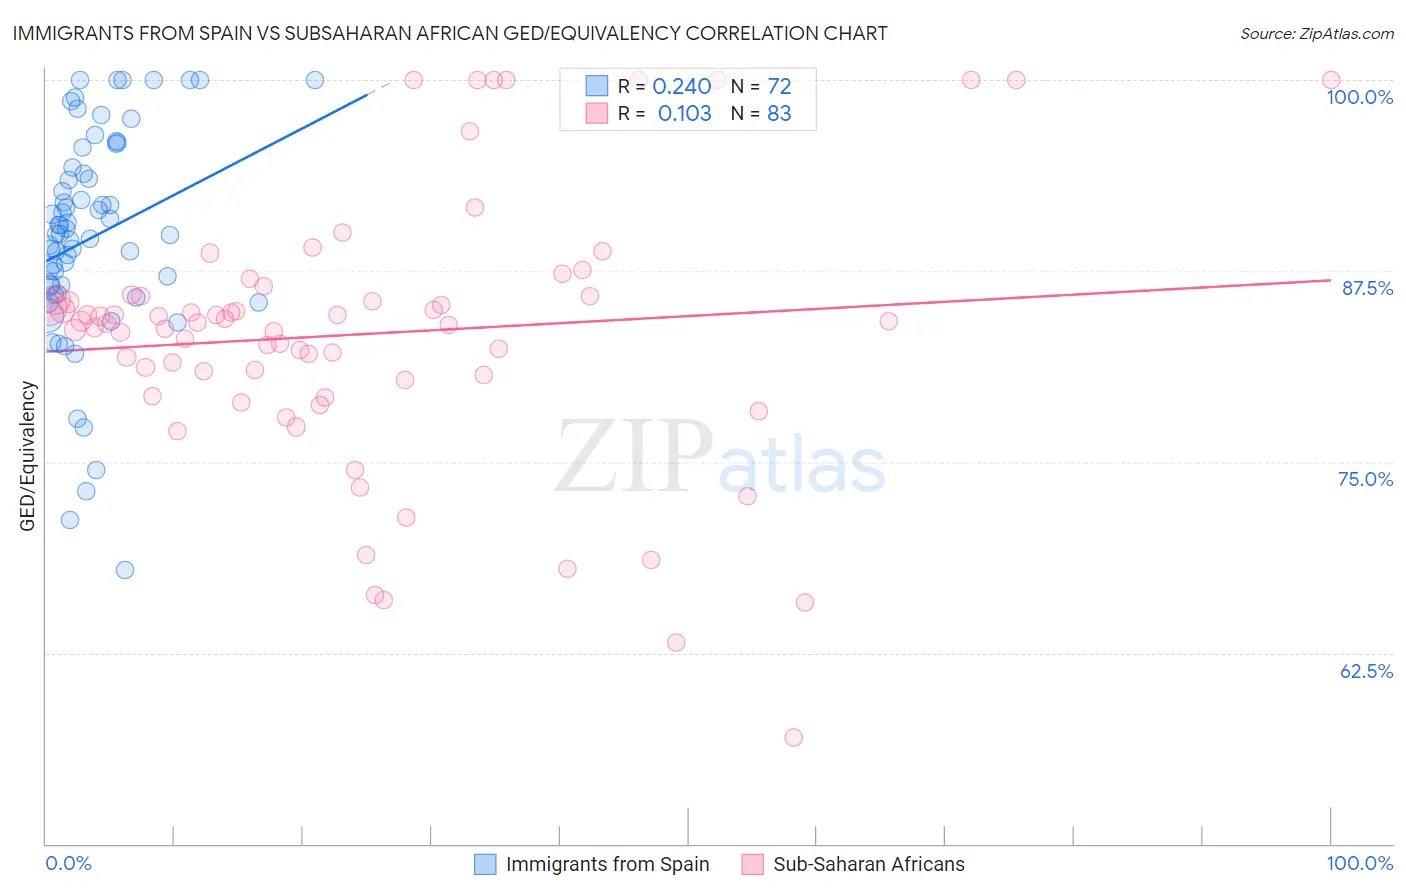 Immigrants from Spain vs Subsaharan African GED/Equivalency